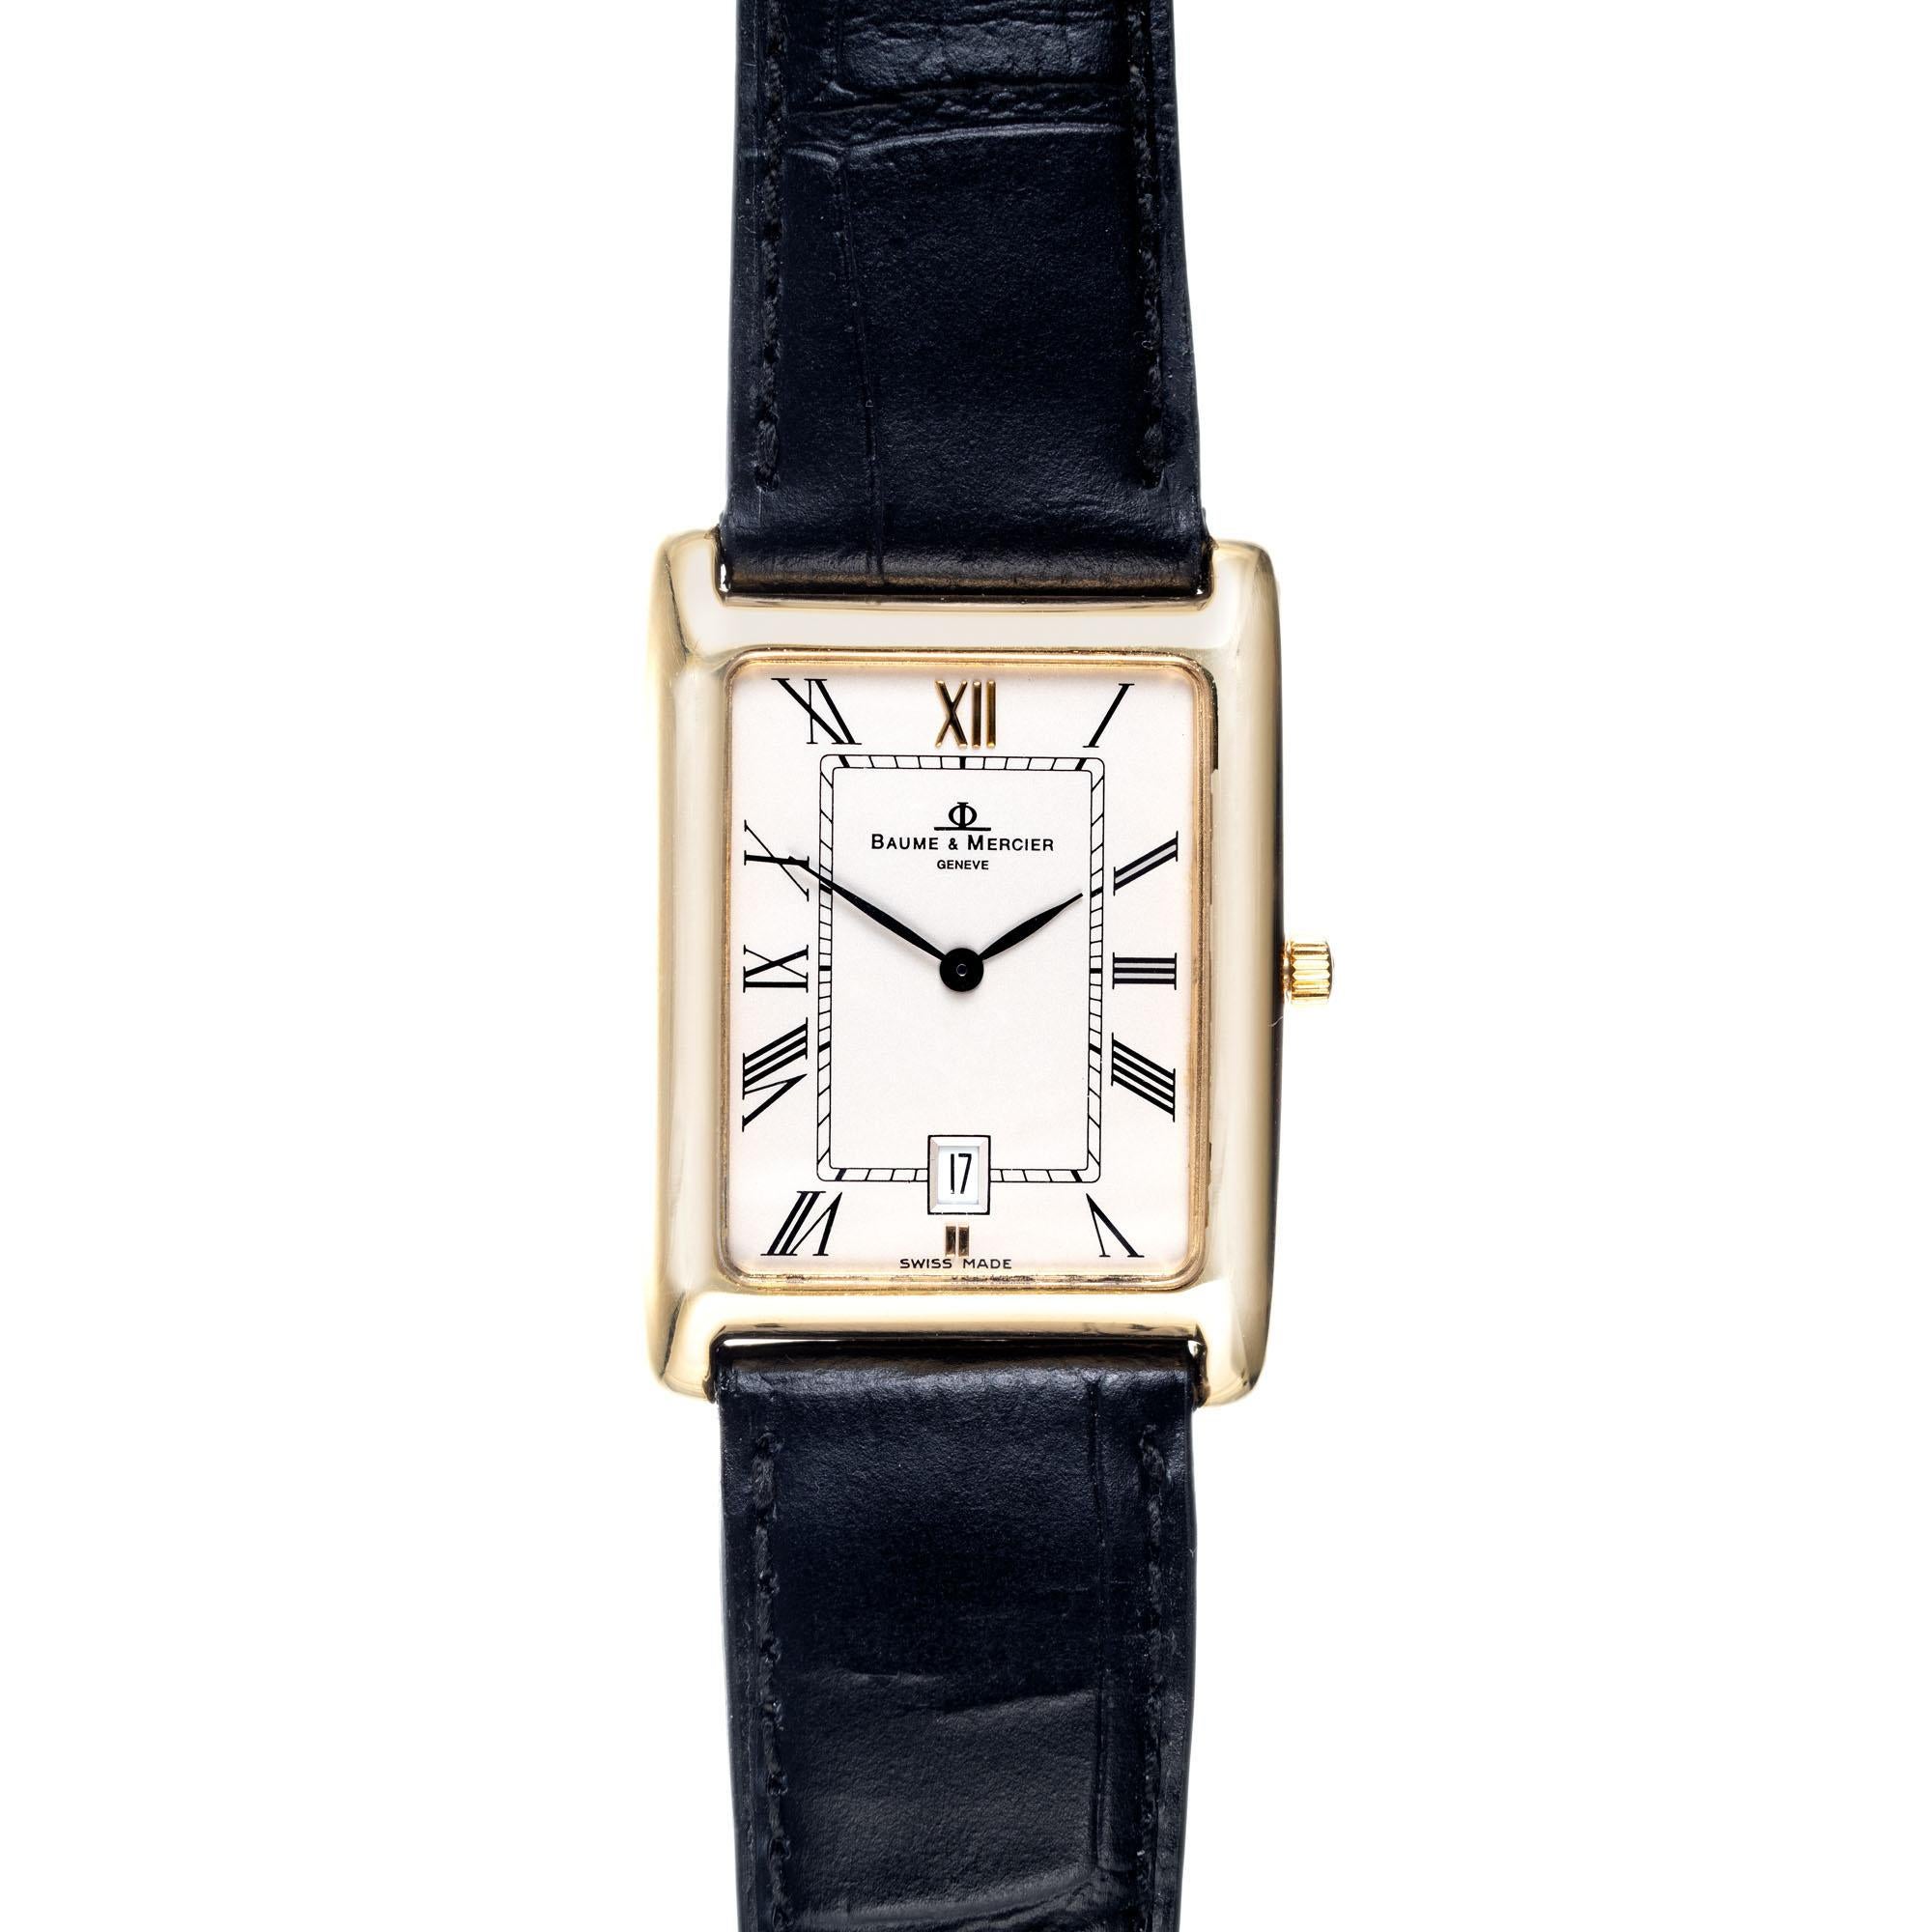 Baume & Mercier 18k yellow gold tank style mens wristwatch. Quartz movement, date and roman numerals.

Length: 35.19mm
Width: 25.57mm
Band width at case: 19mm
Case thickness: 5.19mm
Band: Genuine black leather. New (original buckle)
Crystal: